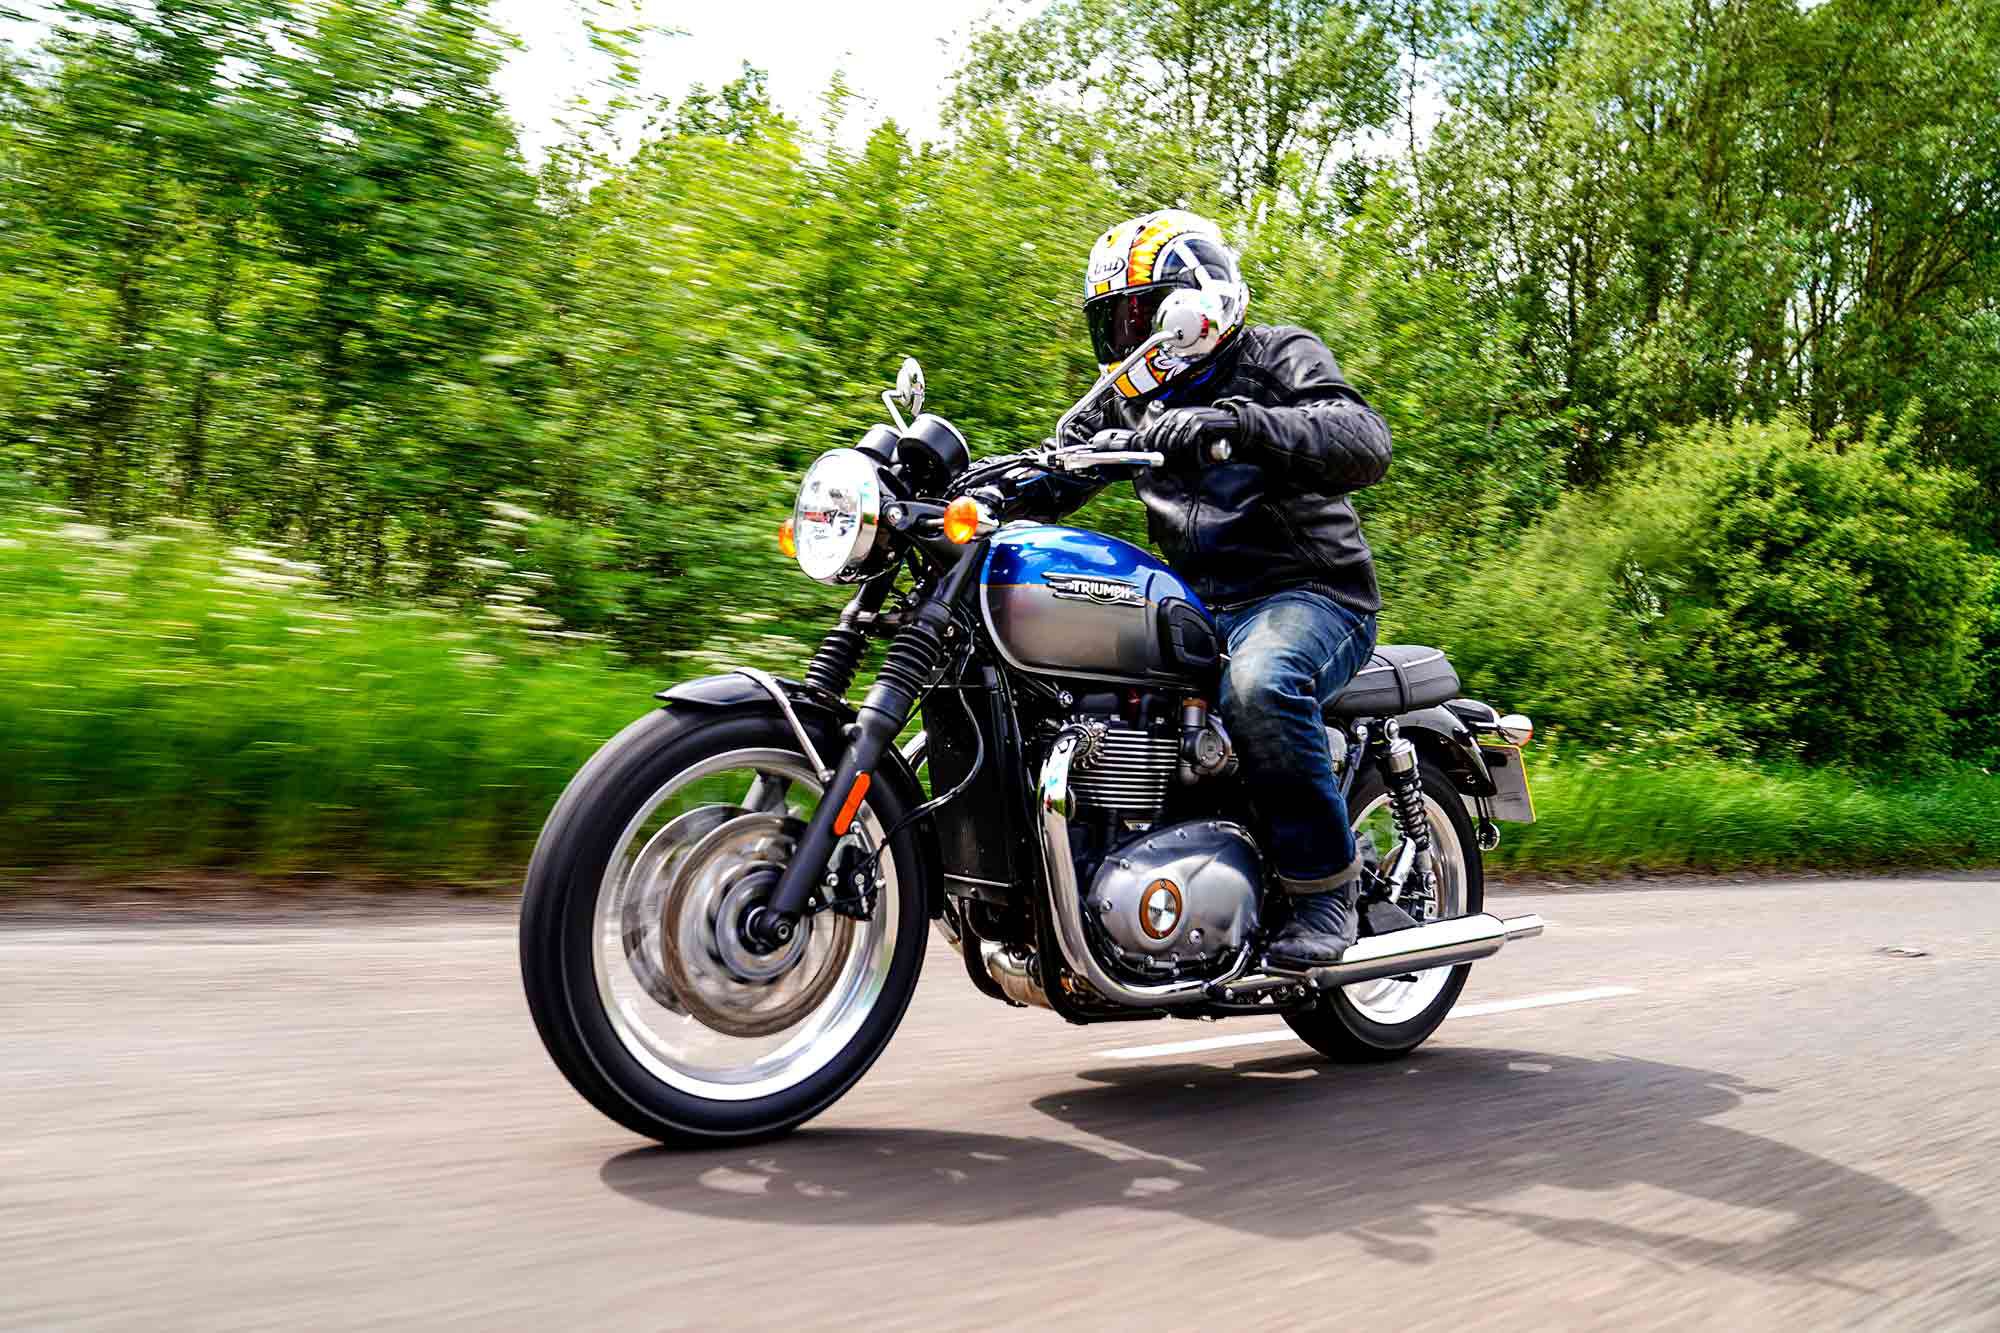 The bigger Bonnie gets six gears, one more than the T100’s five-speed gearbox.